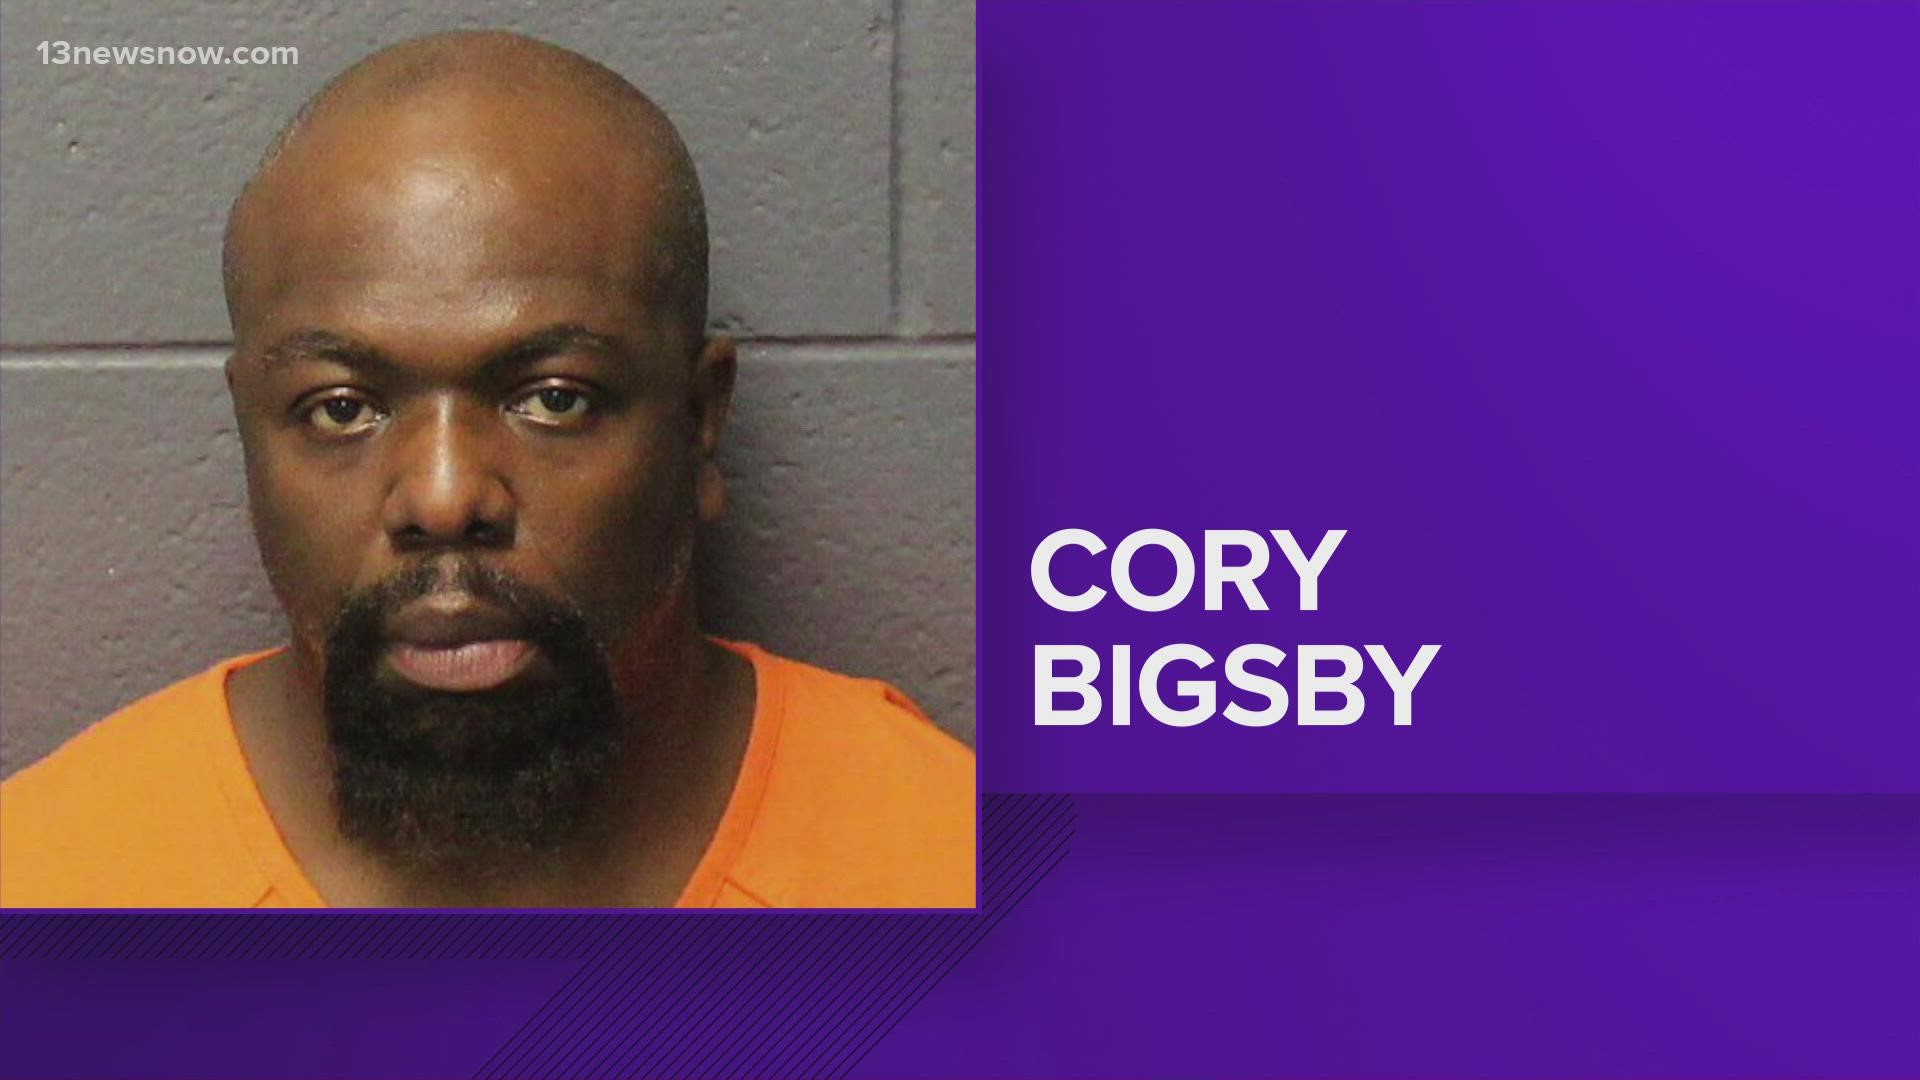 A second bond hearing: another denial. A judge decided not to grant bond for Cory Bigsby.